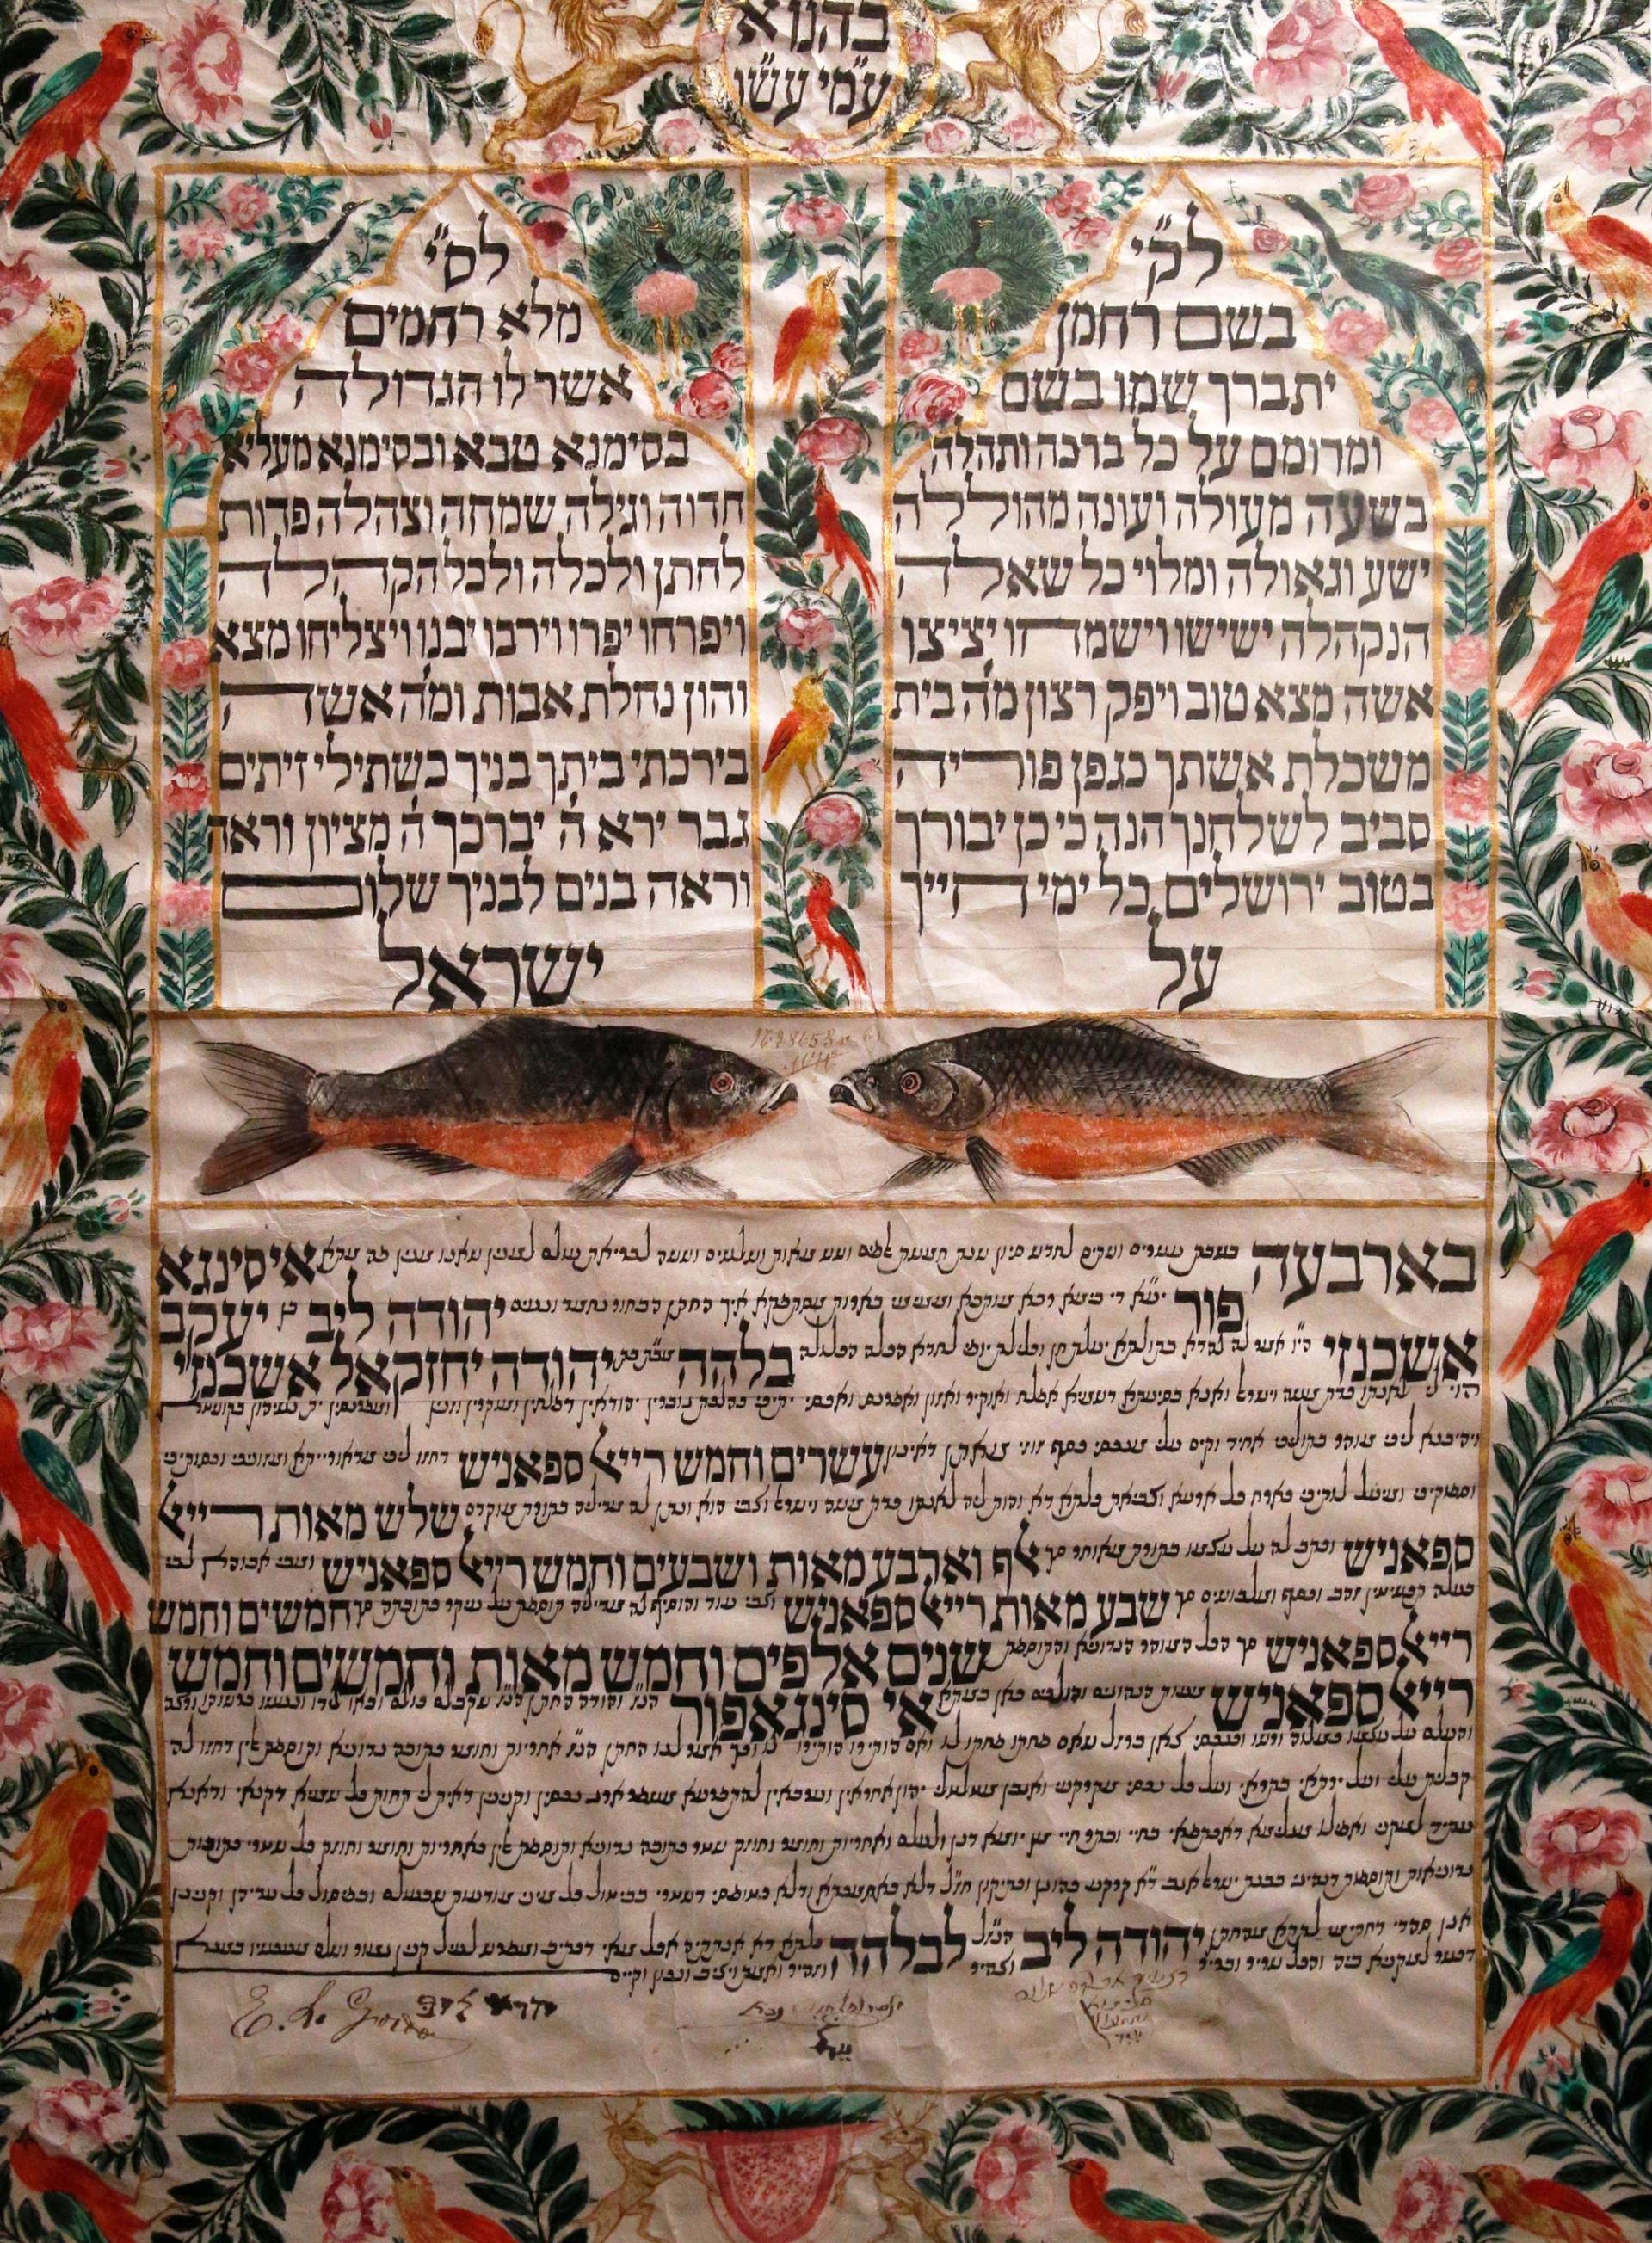 A ketubah at the Museum of Jewish Art and History in Paris